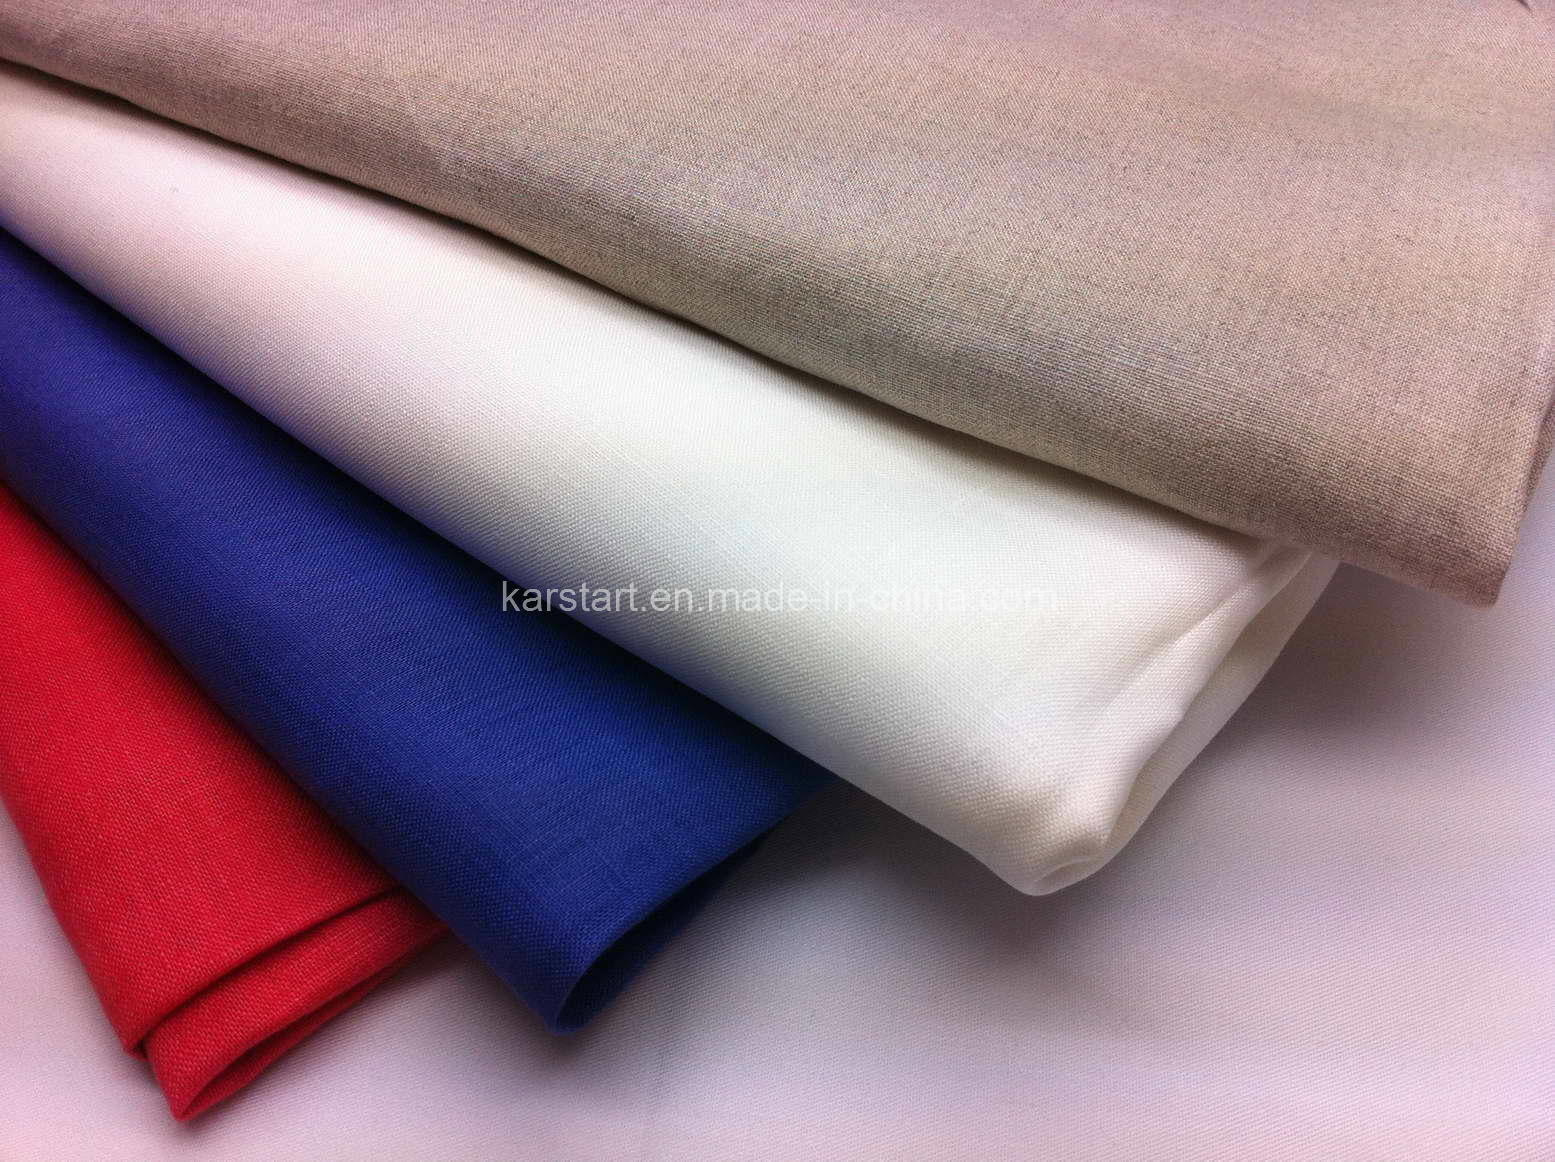 100% Pfd or Dyed Linen Fabric